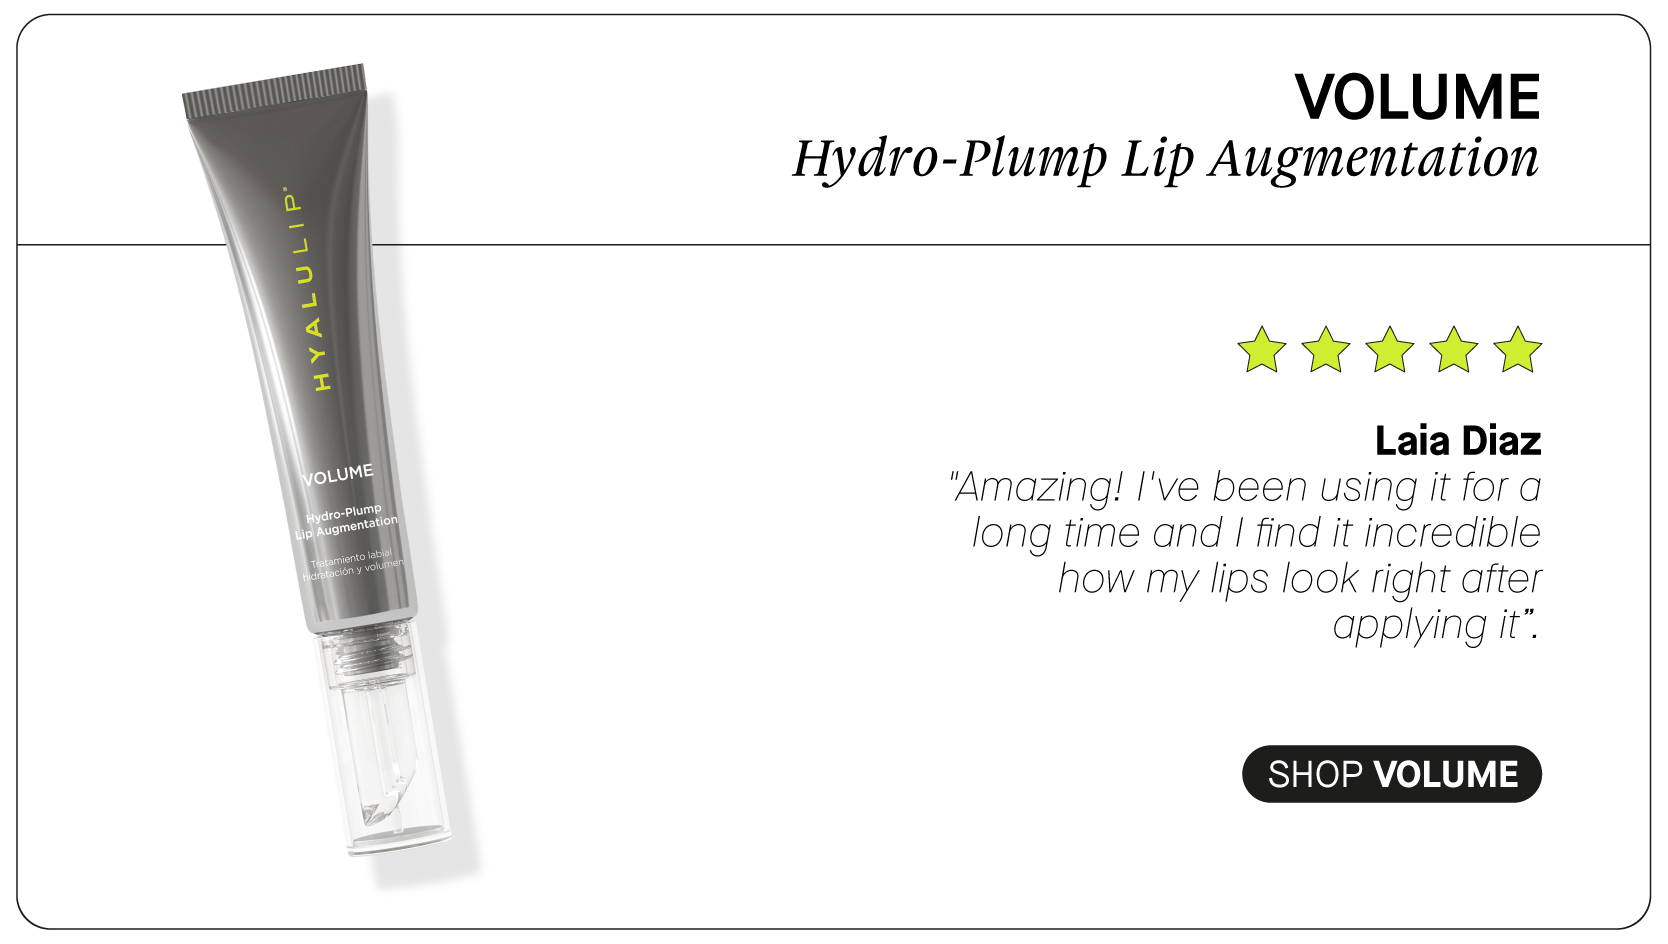  VOLUME Hydro-Plump Lip Augmentation WA W Laia Diaz "Amazing! I've been using it for a long time and find it incredible how my lips look right after applying it". SHOP VOLUME 